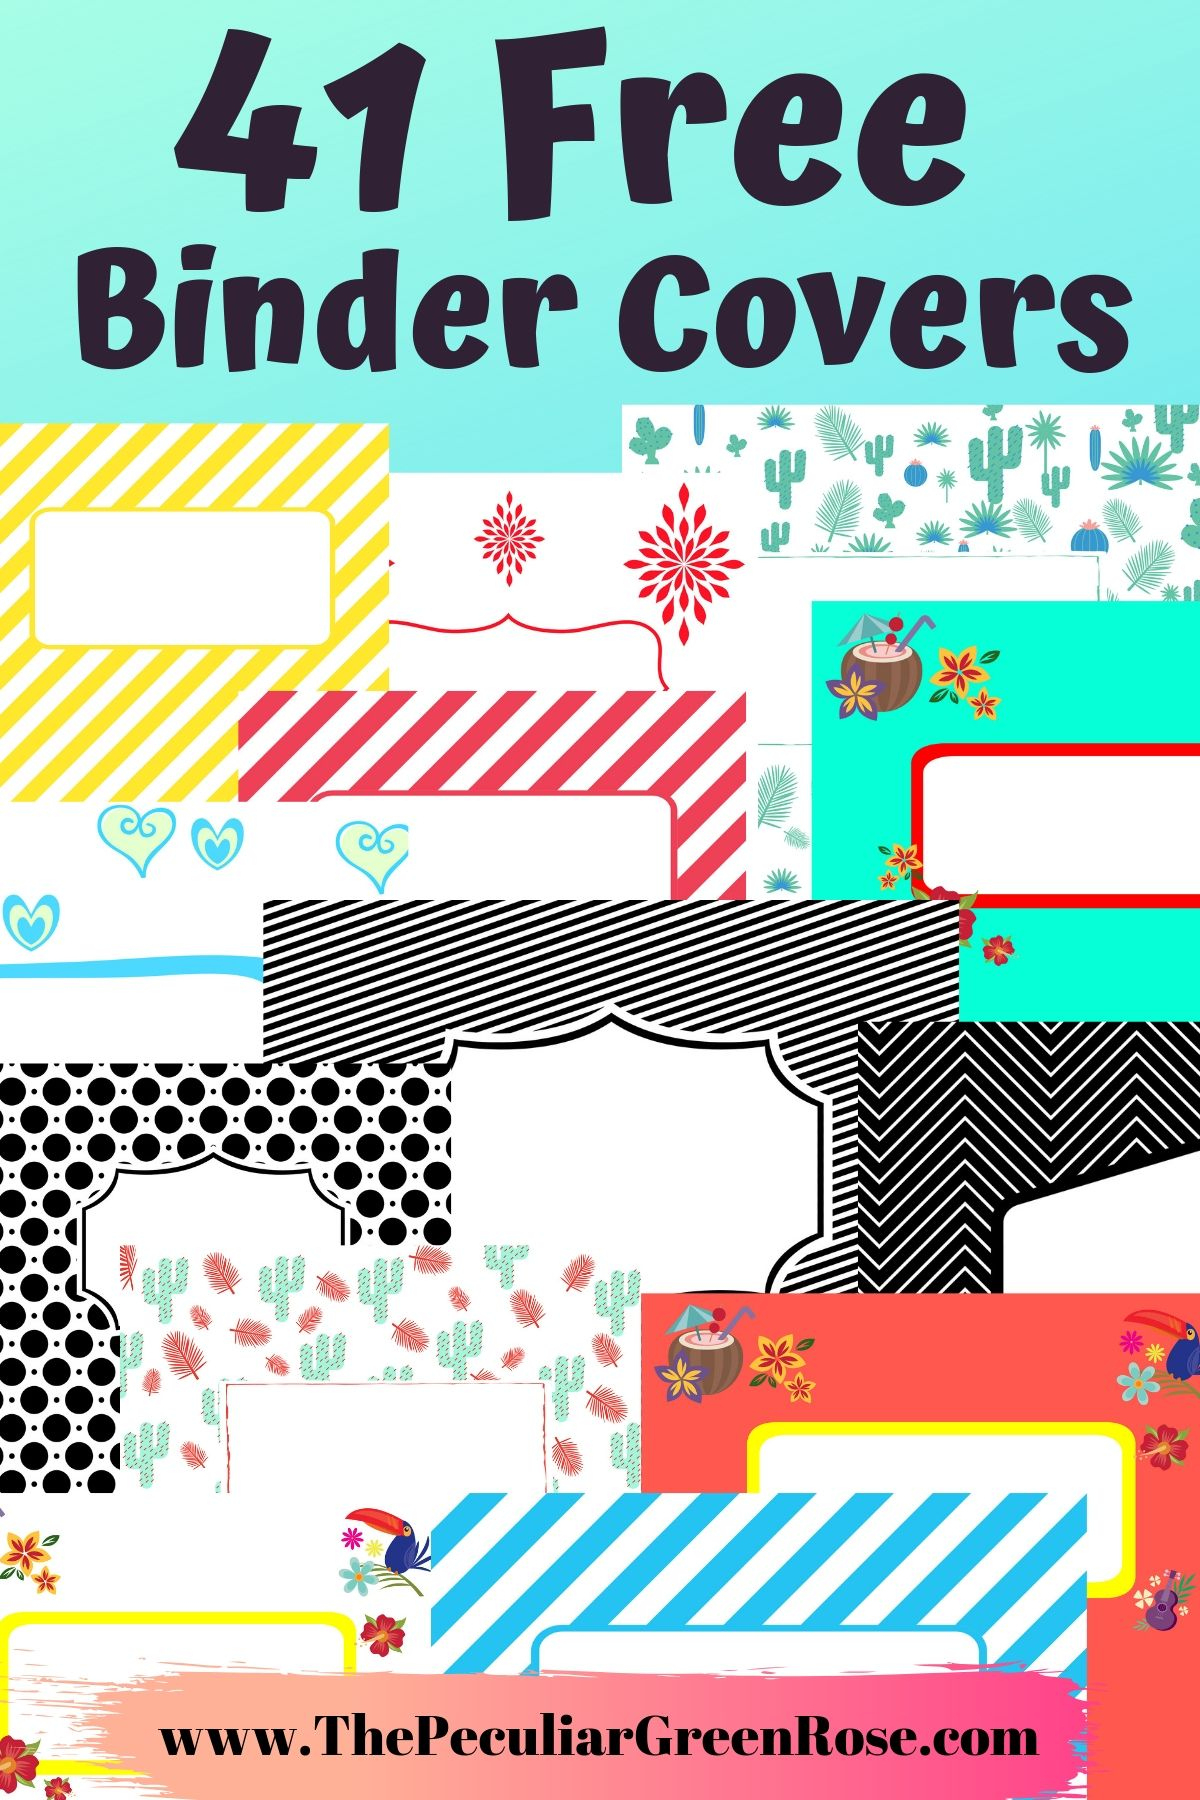 41 Free Printable Binder Covers - The Peculiar Green Rose in Free Editable Printable Binder Covers And Spines